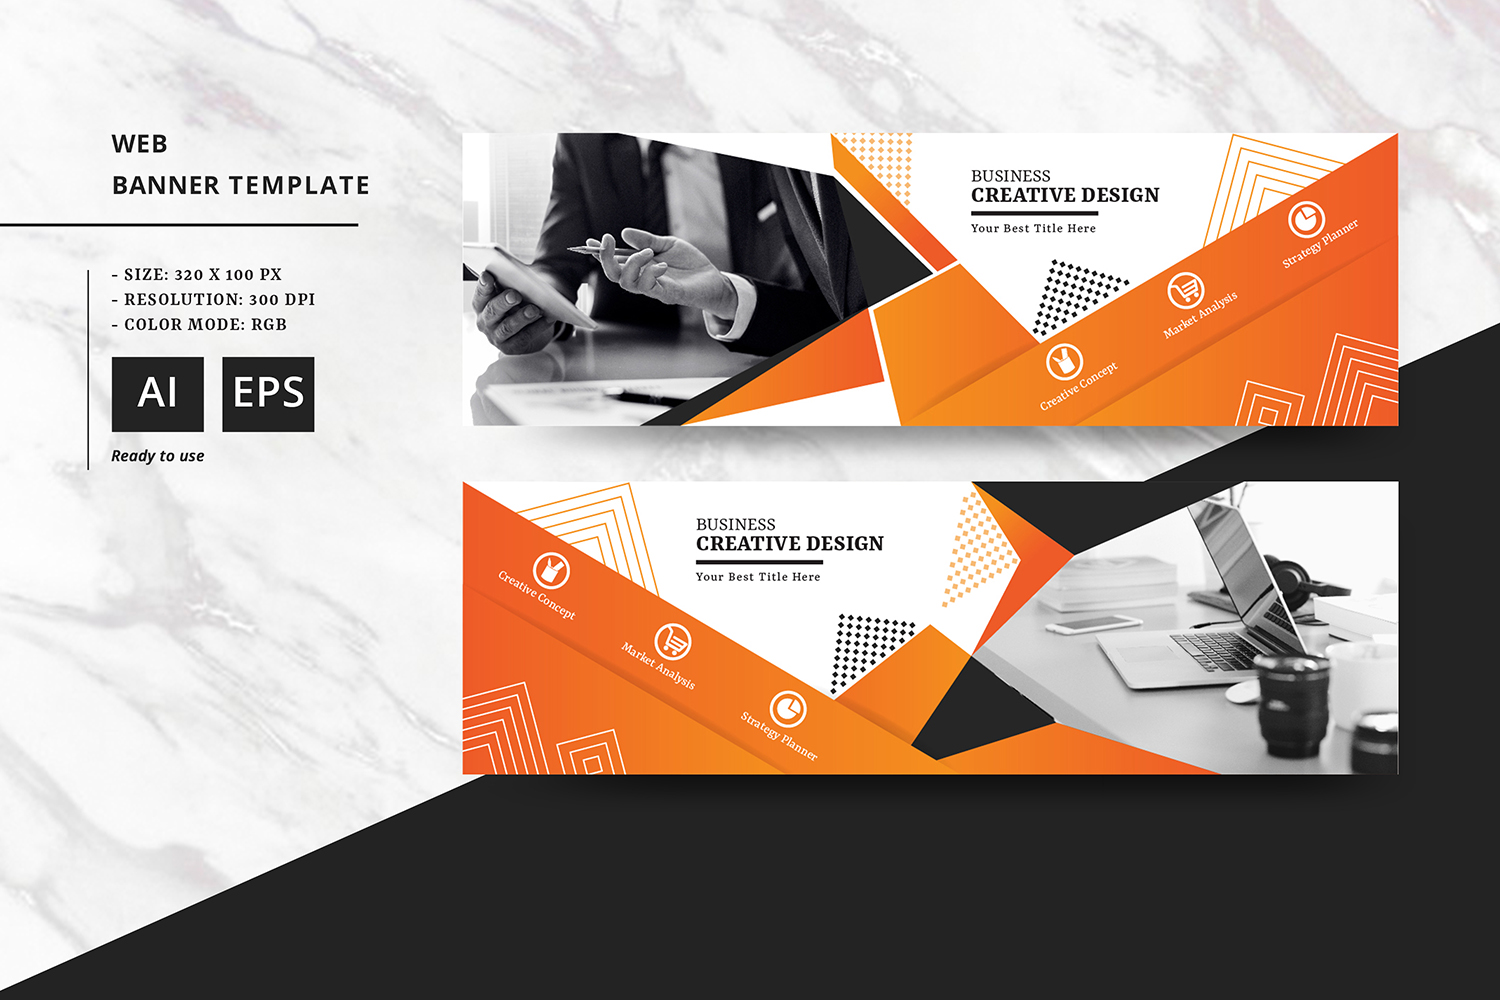 Web Banner - Corporate Identity Template